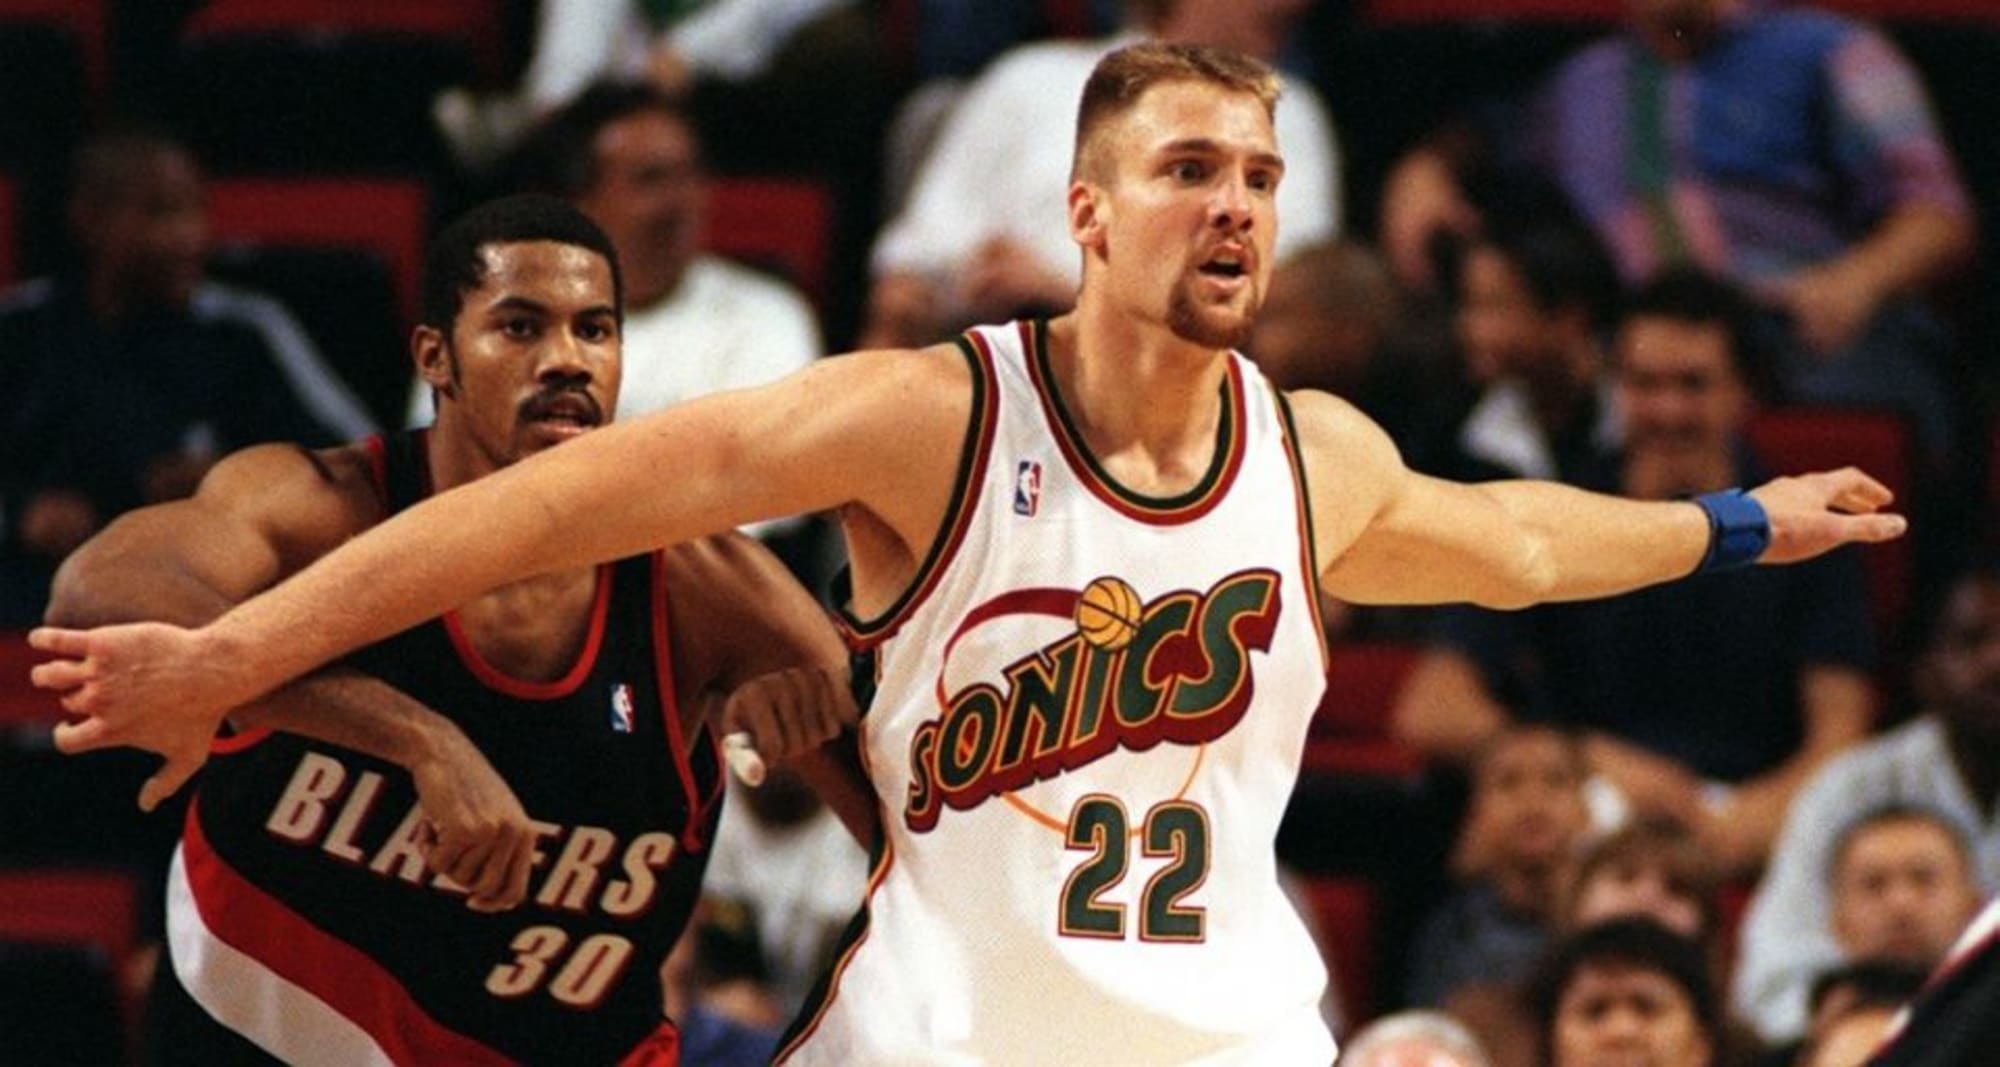 Shawn Kemp on why he left the Sonics: 'They weren't going to pay